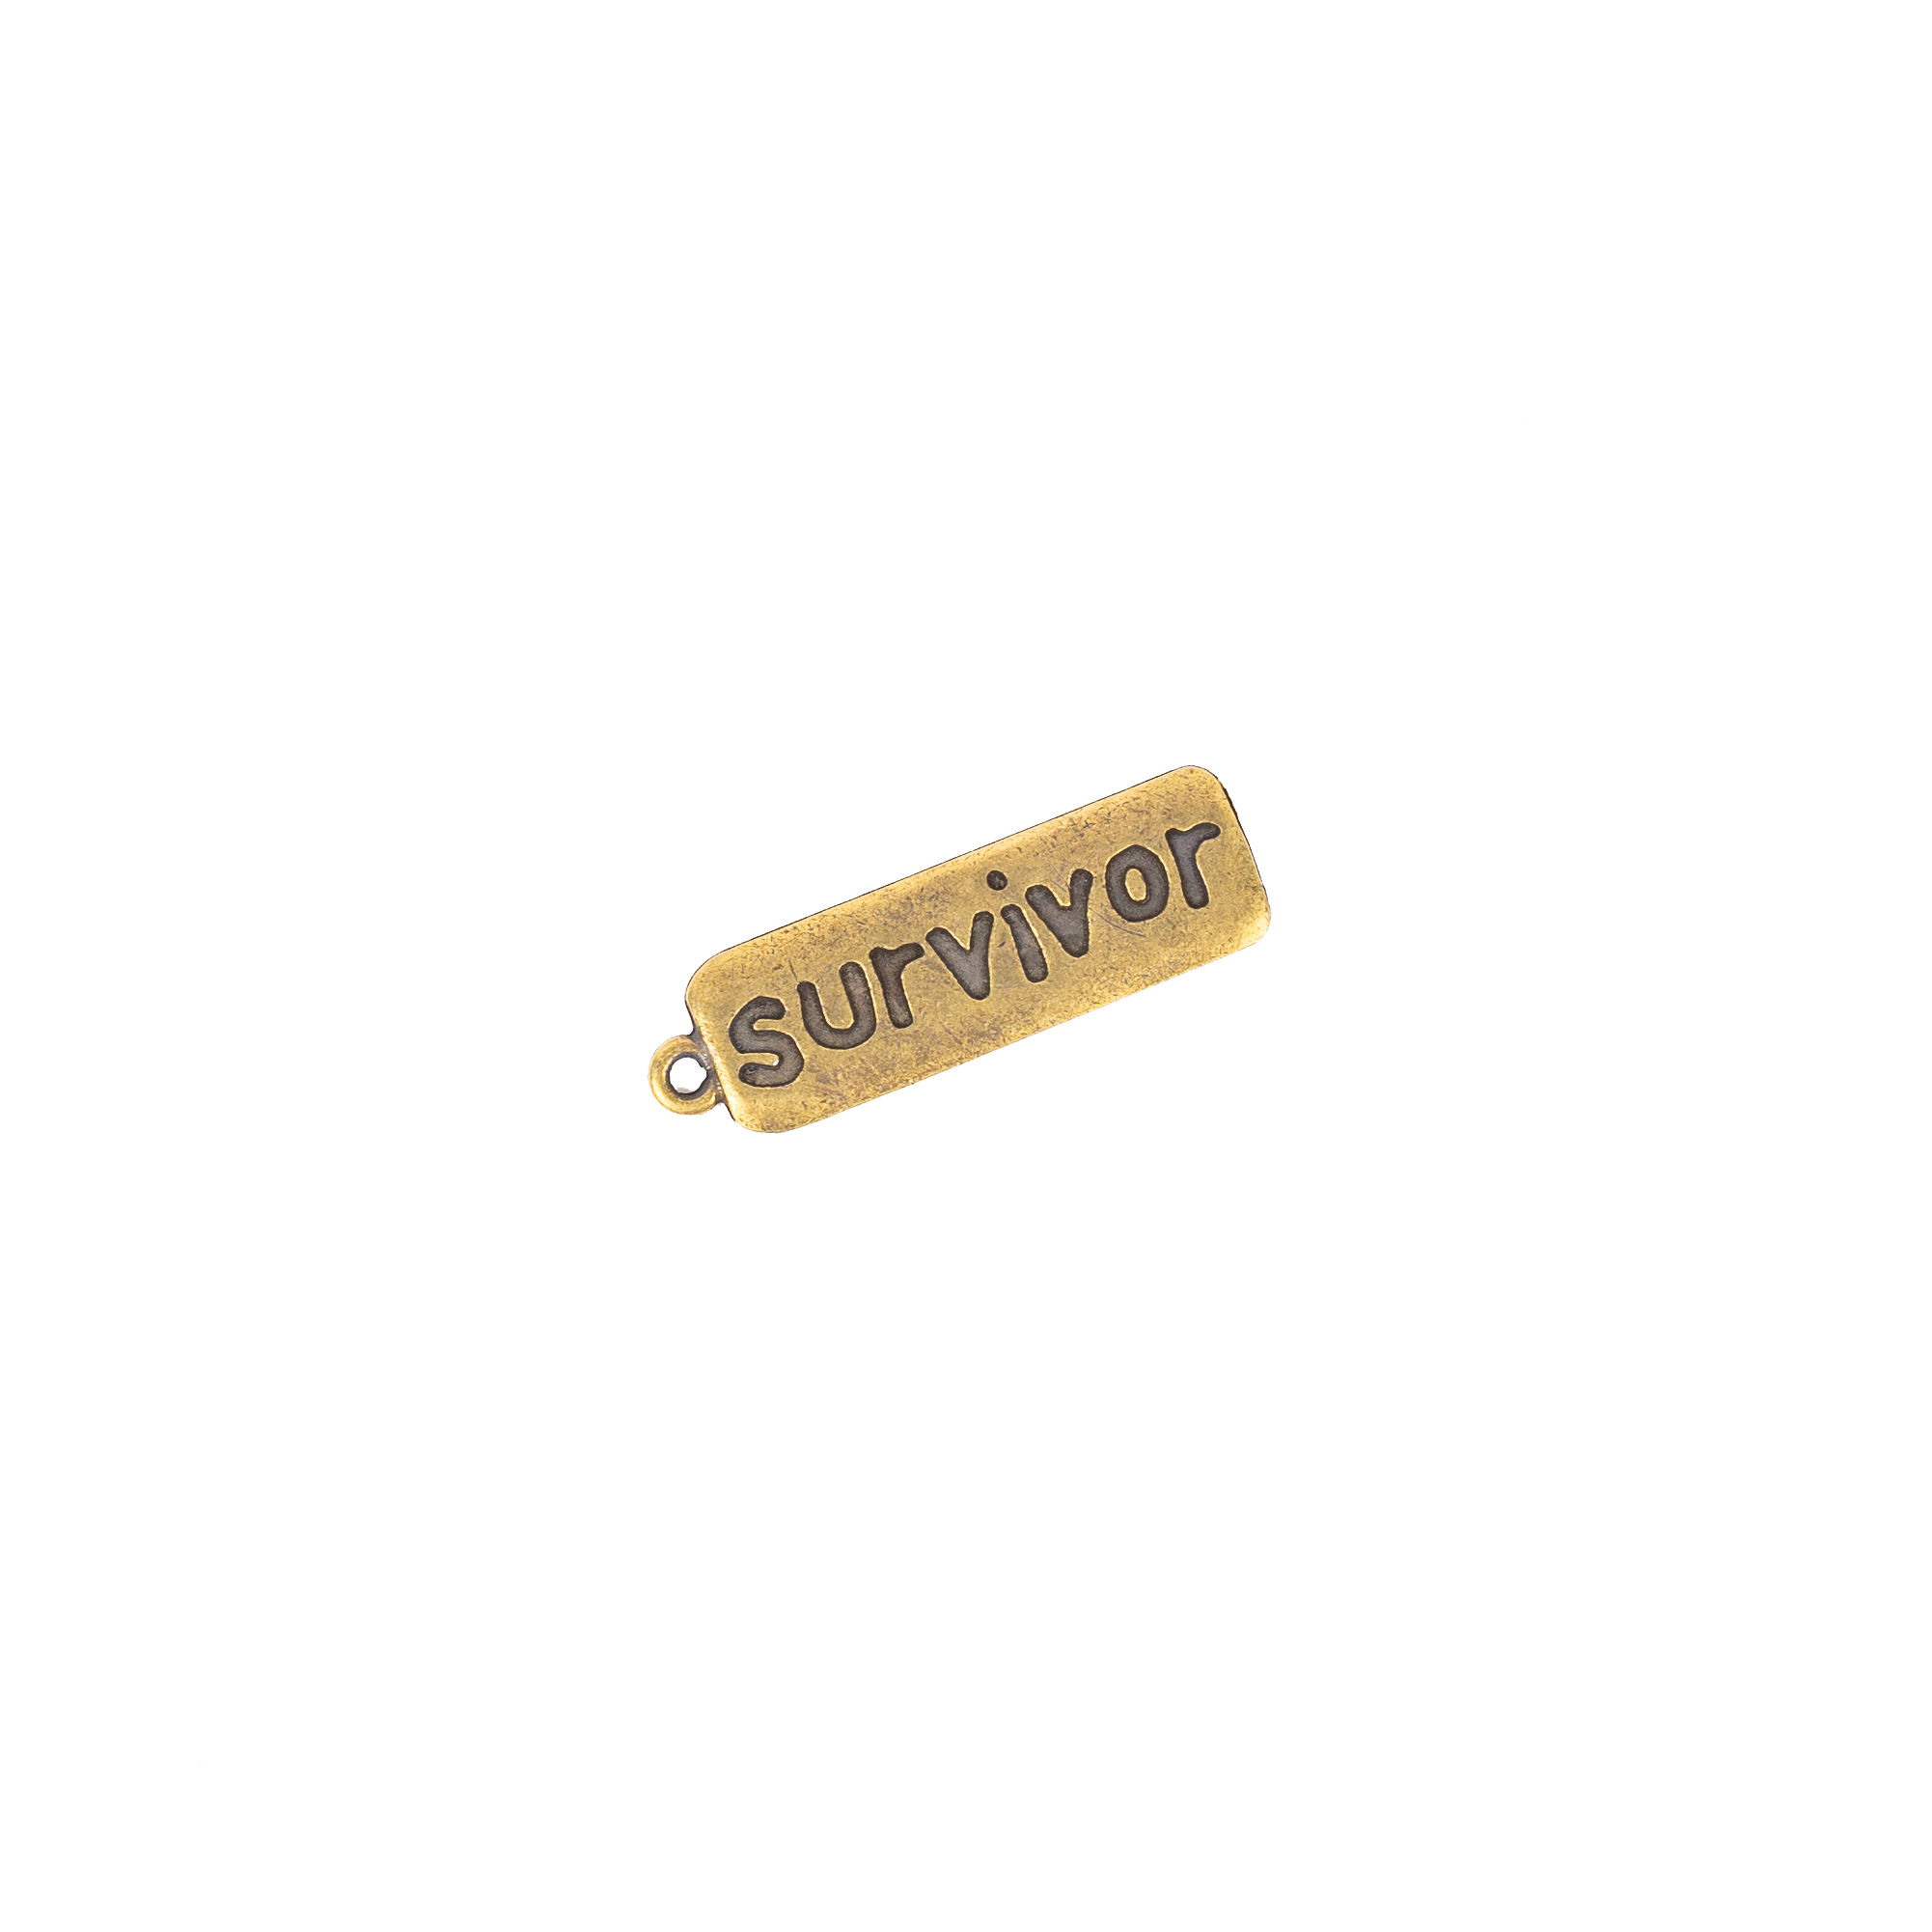 Survivor Tag | Beads of Courage UK and Ireland